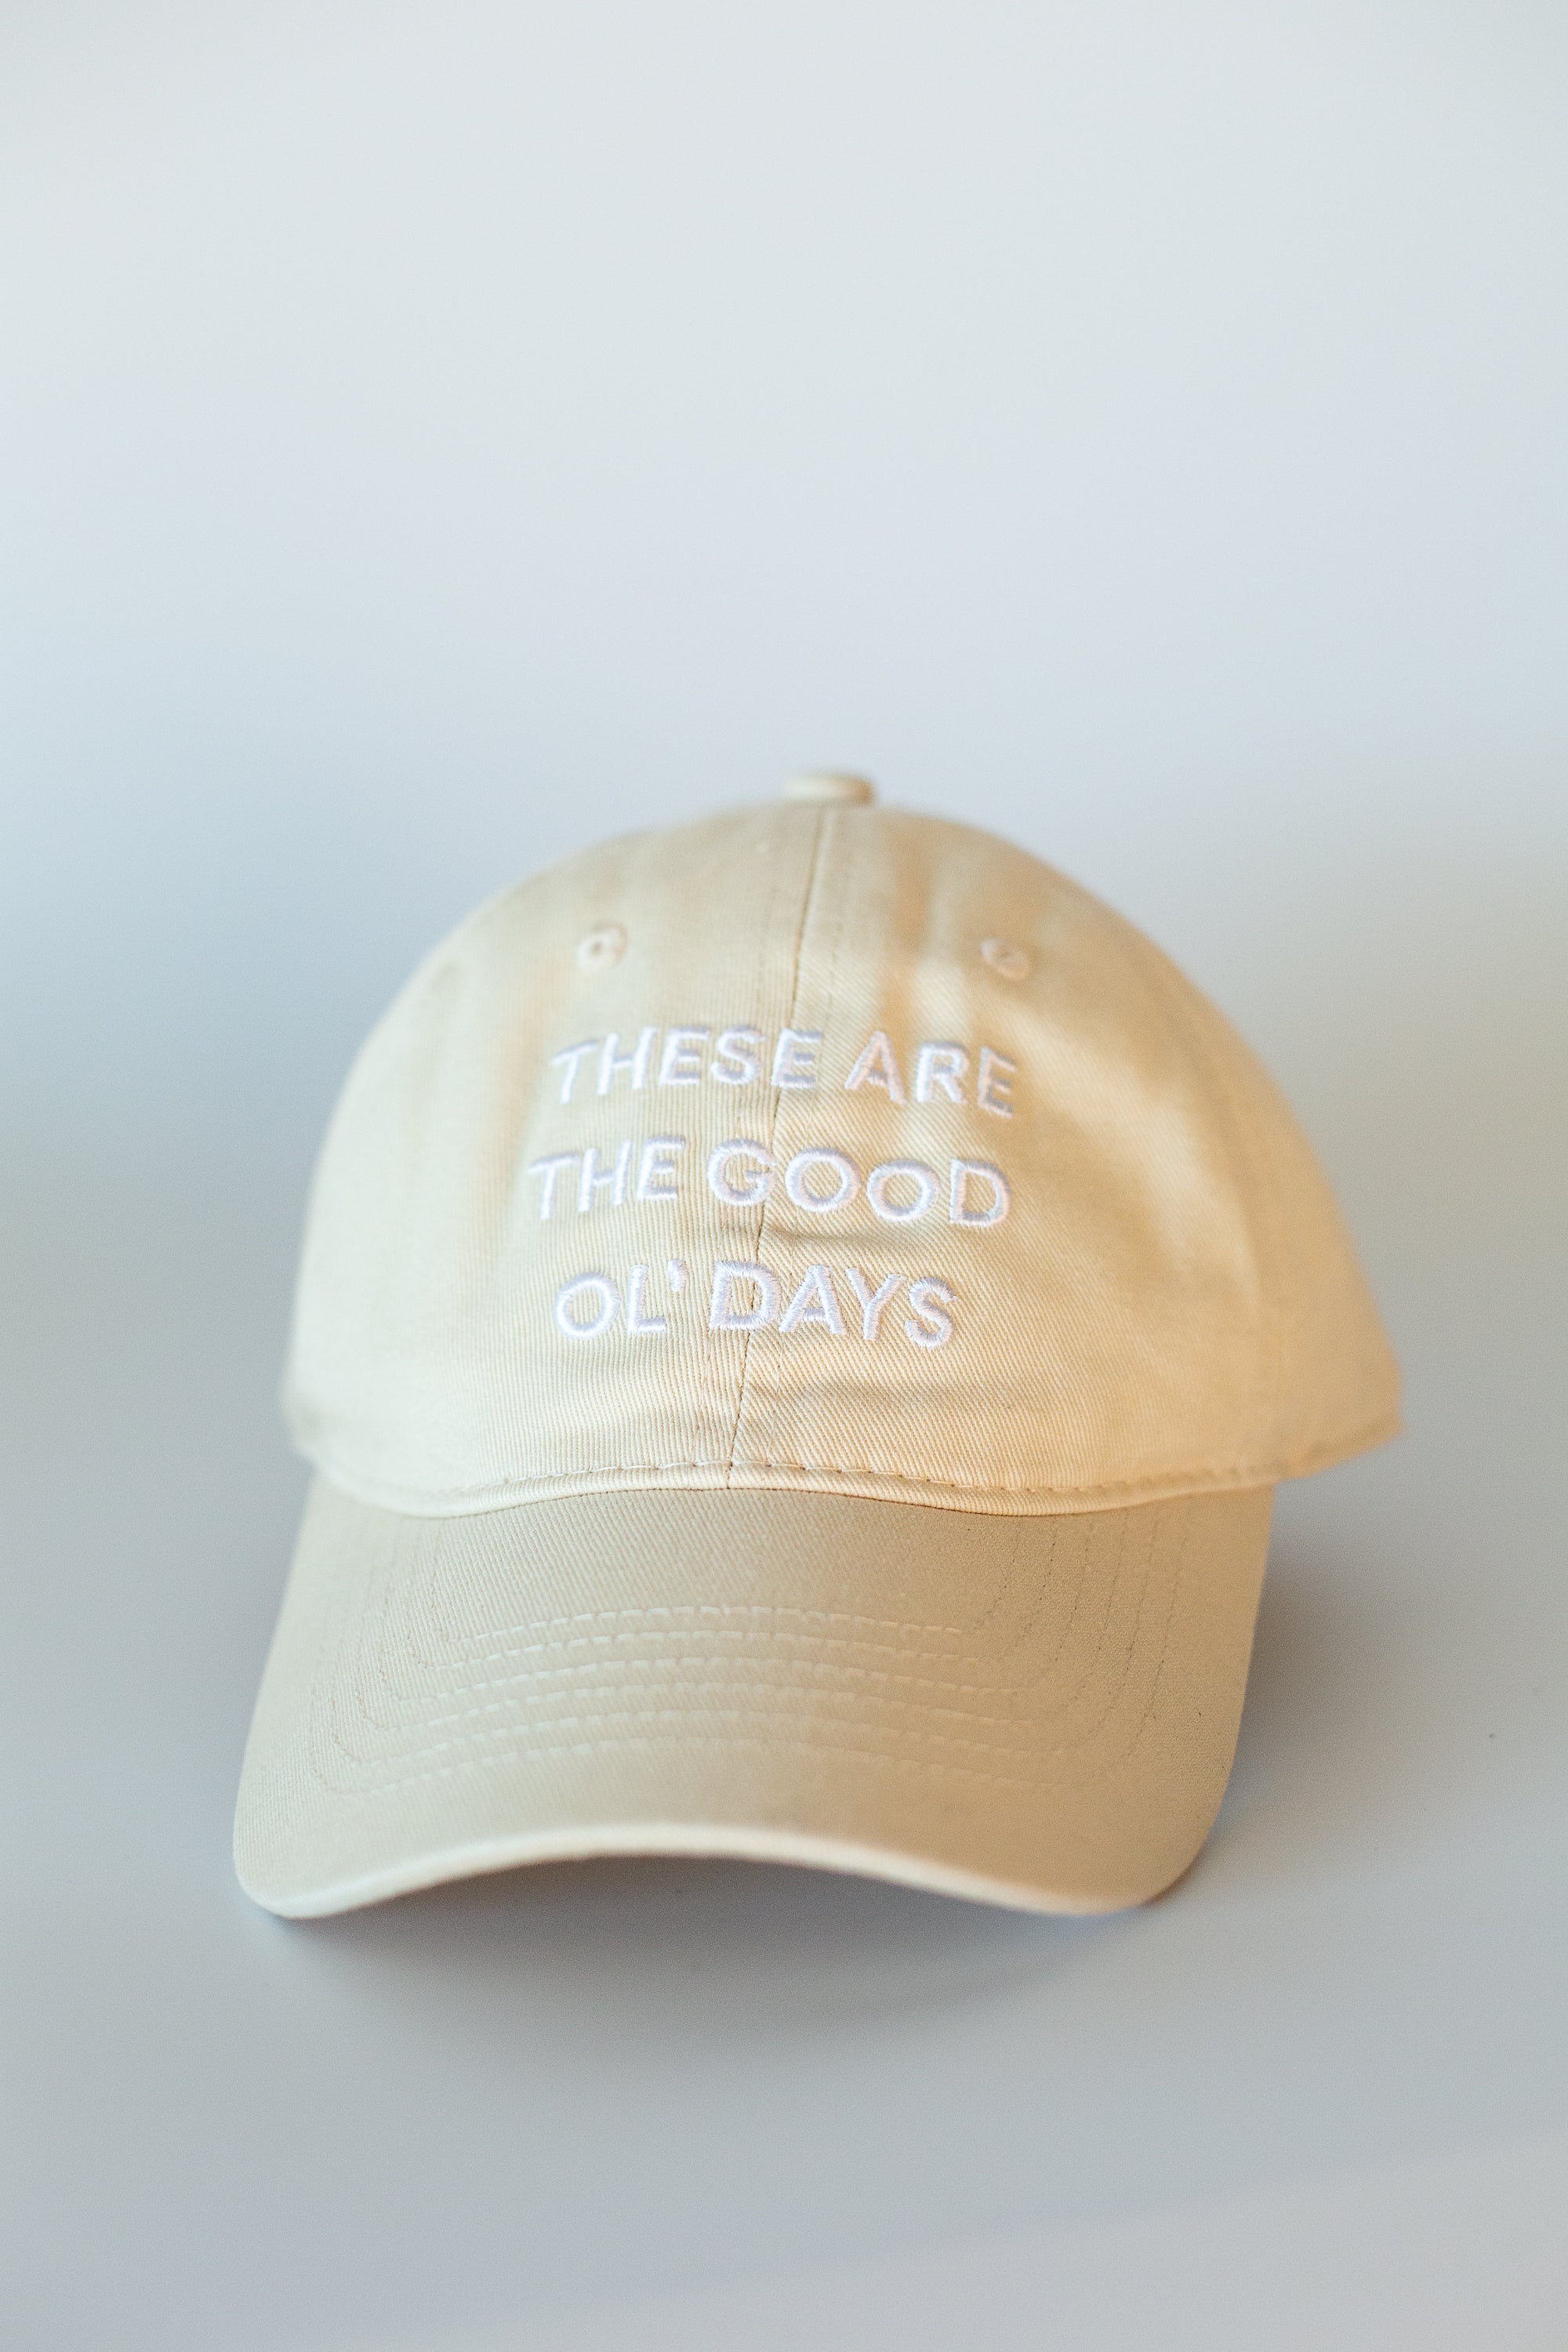 These are the good ol' days - Baseball Cap Child Size – Modern Burlap